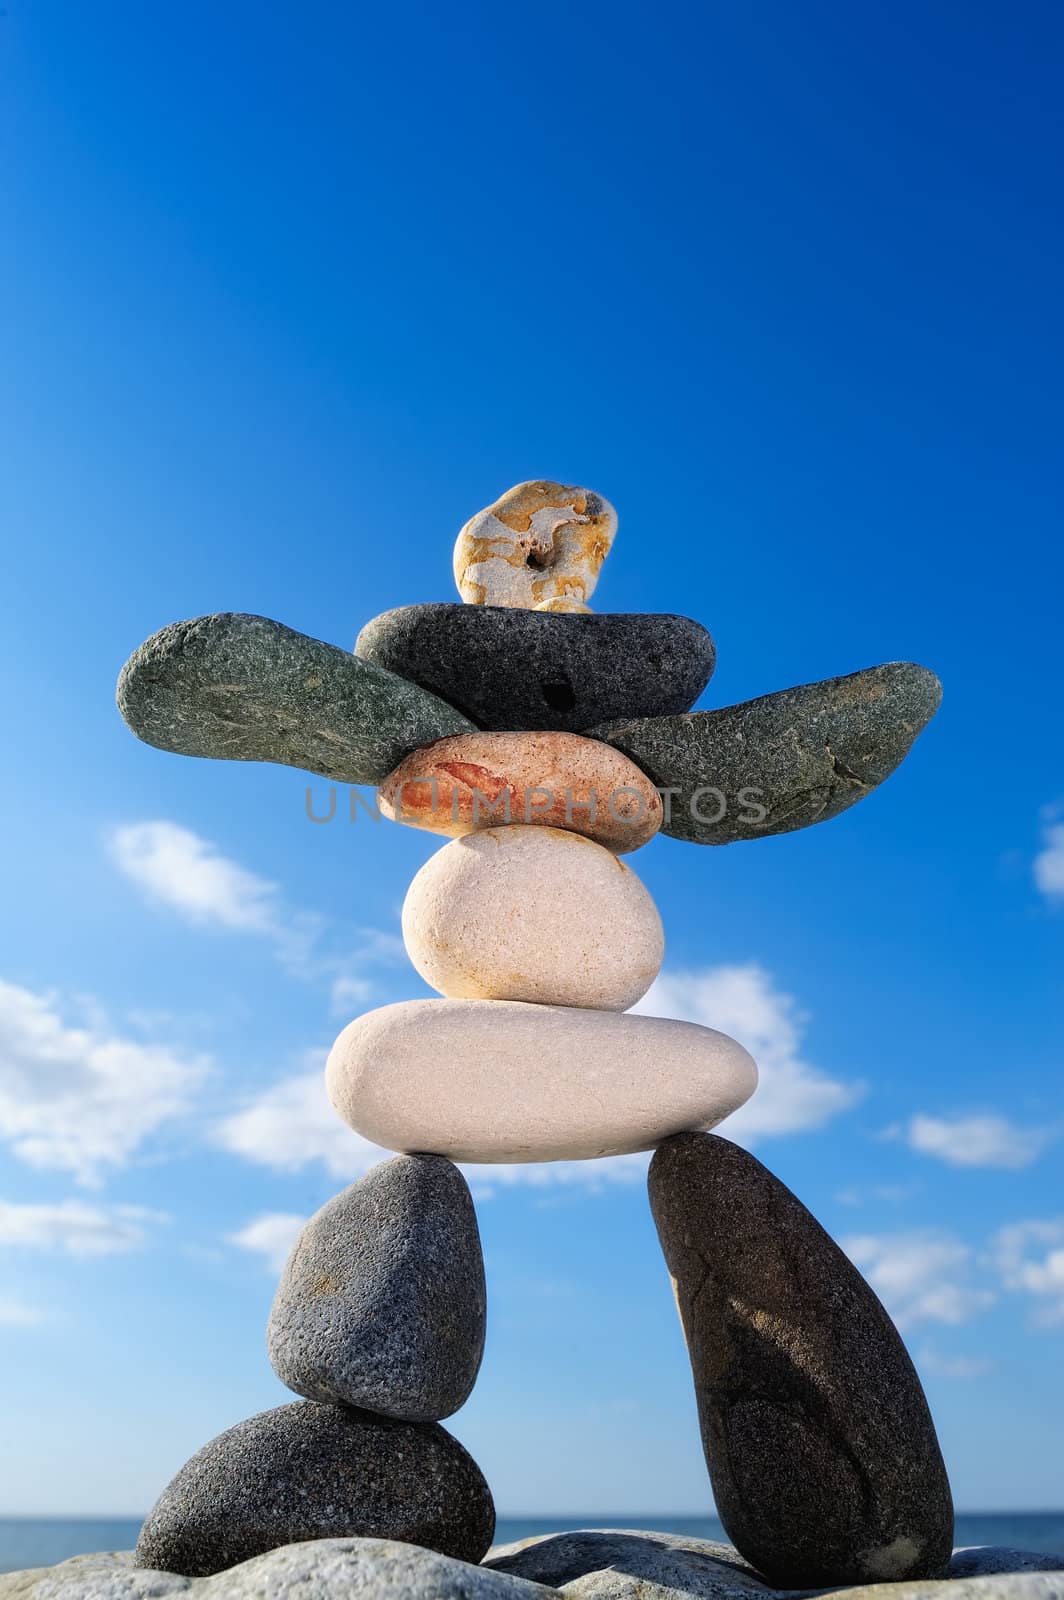 Figurine of pebbles against a background of blue sky